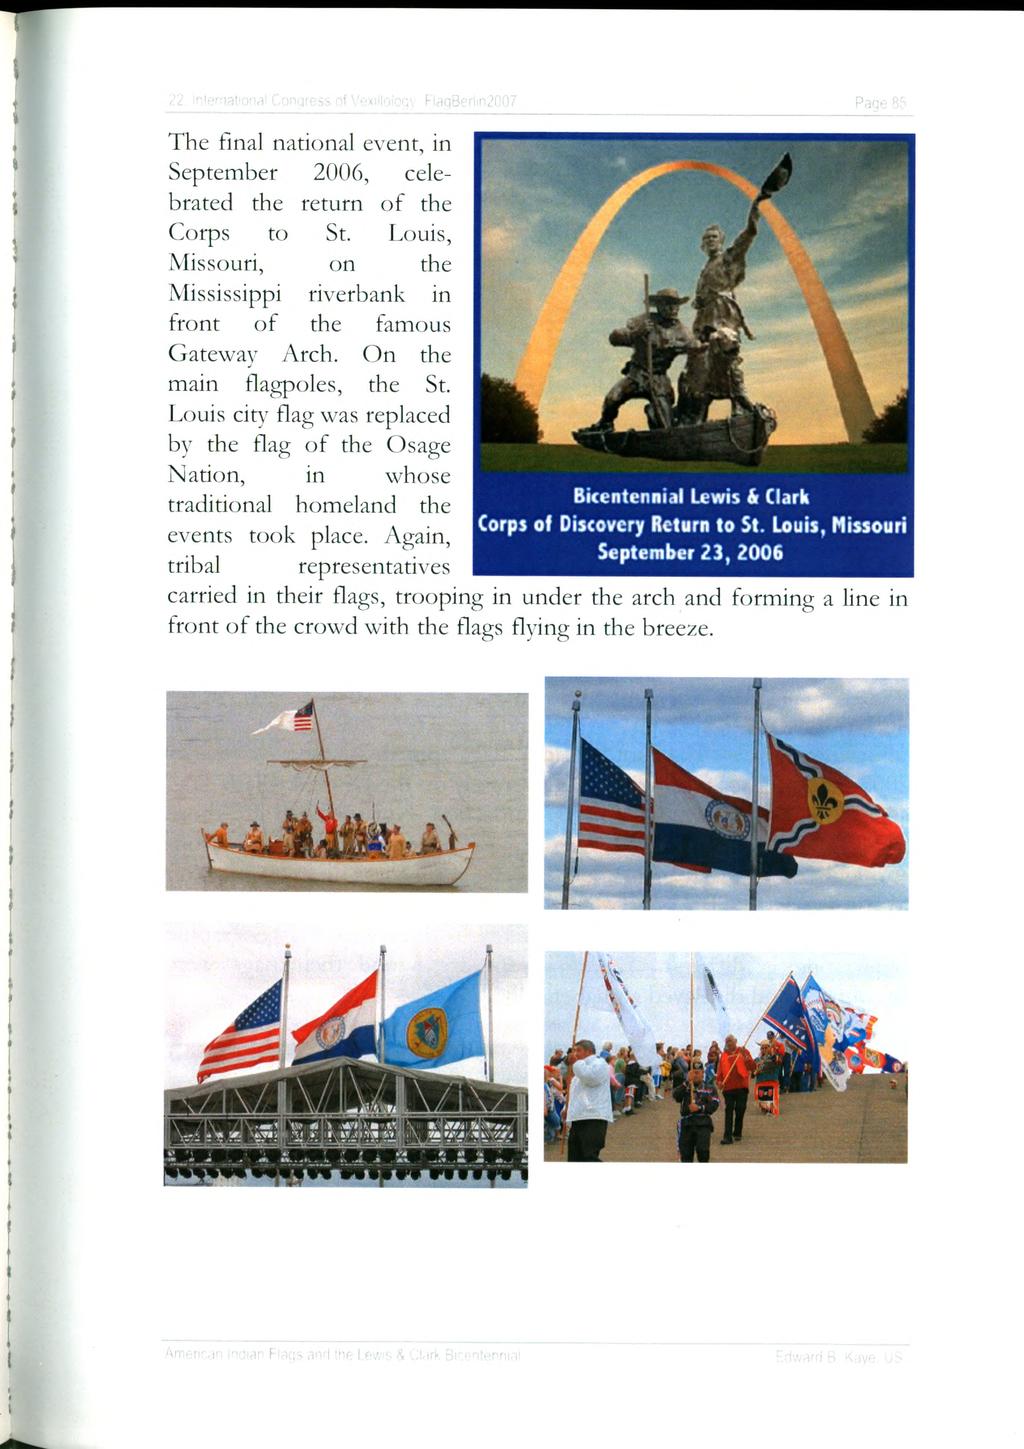 Page 85 The final national event, in September 2006, celebrated the return of the Corps to St. Louis, Missouri, on the Mississippi riverbank in front of the famous Gateway Arch.